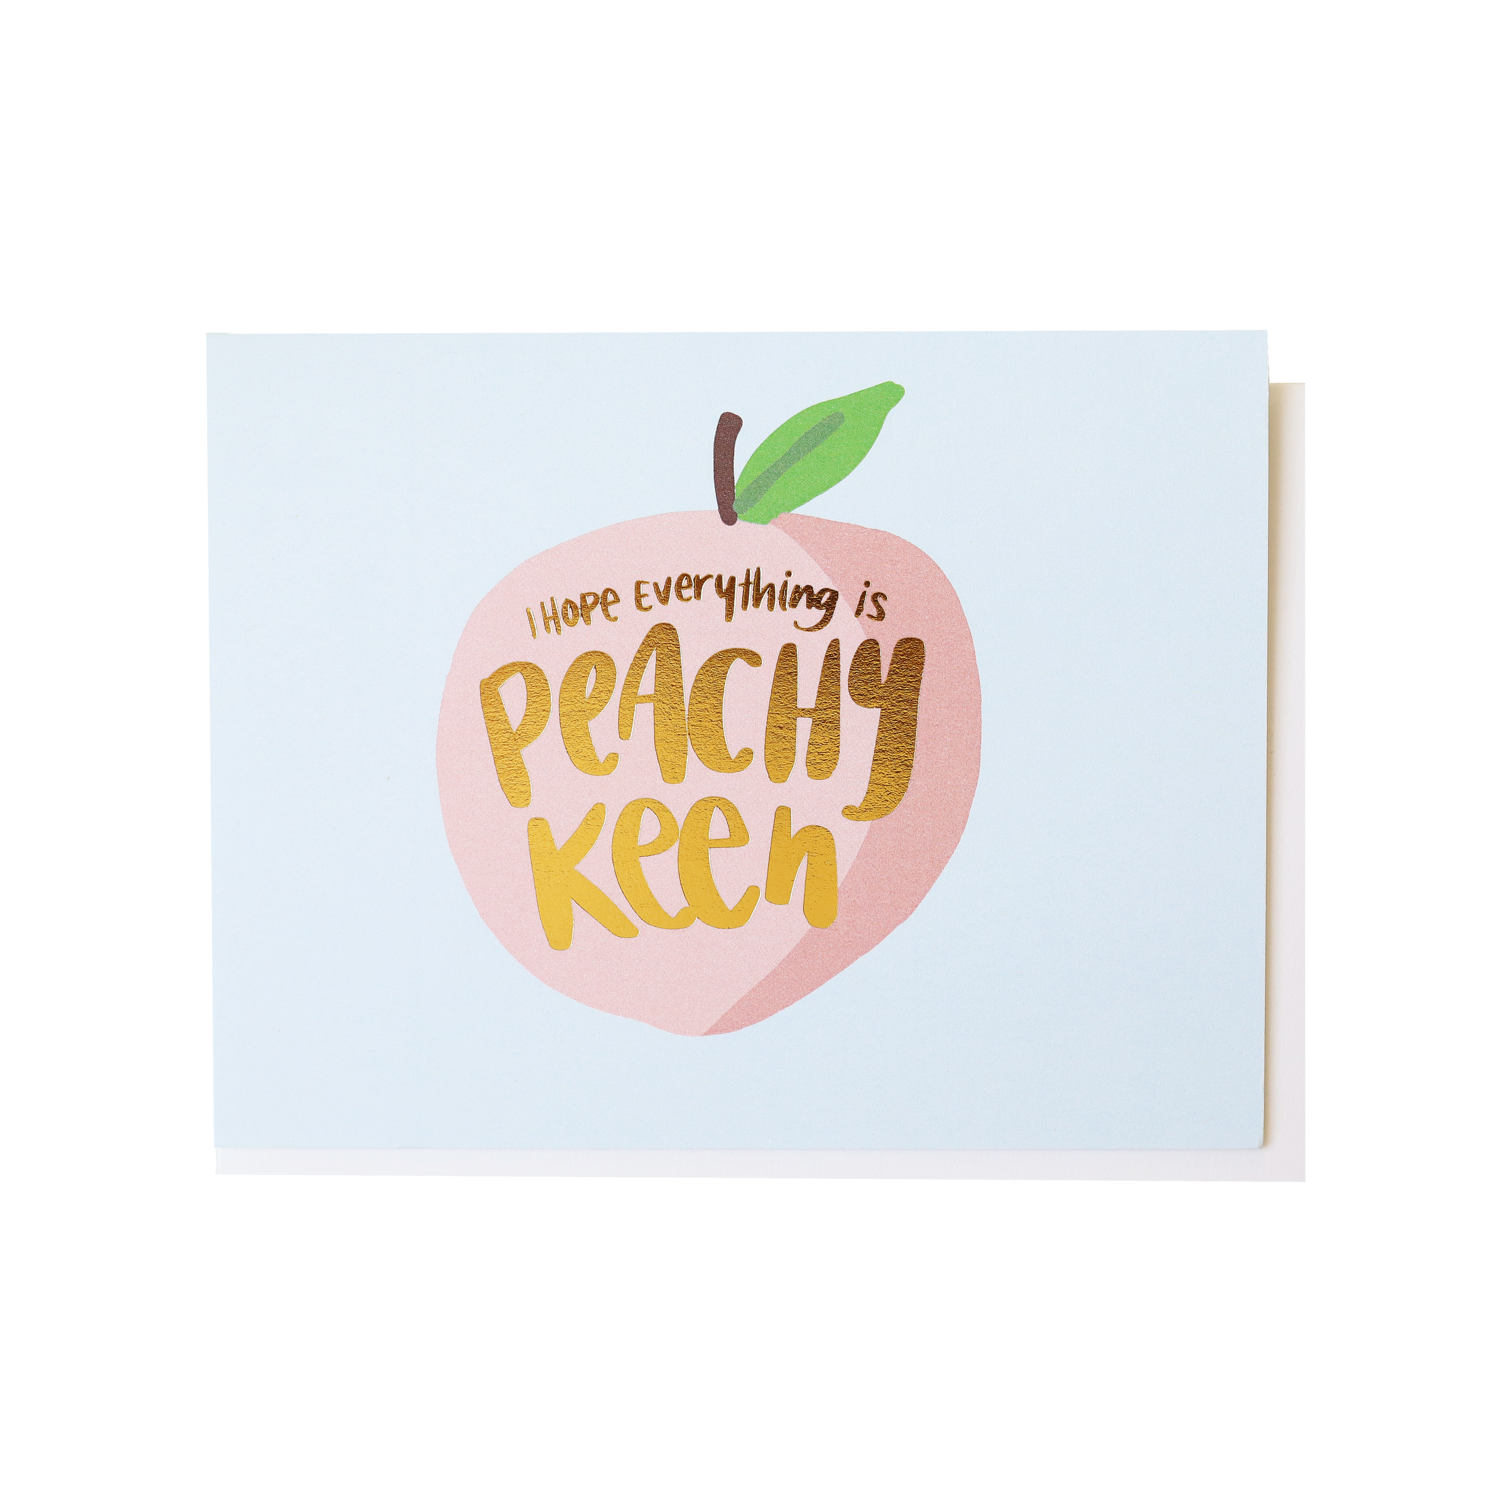 Penny Paper Co Greeting Card - Peachy Keen